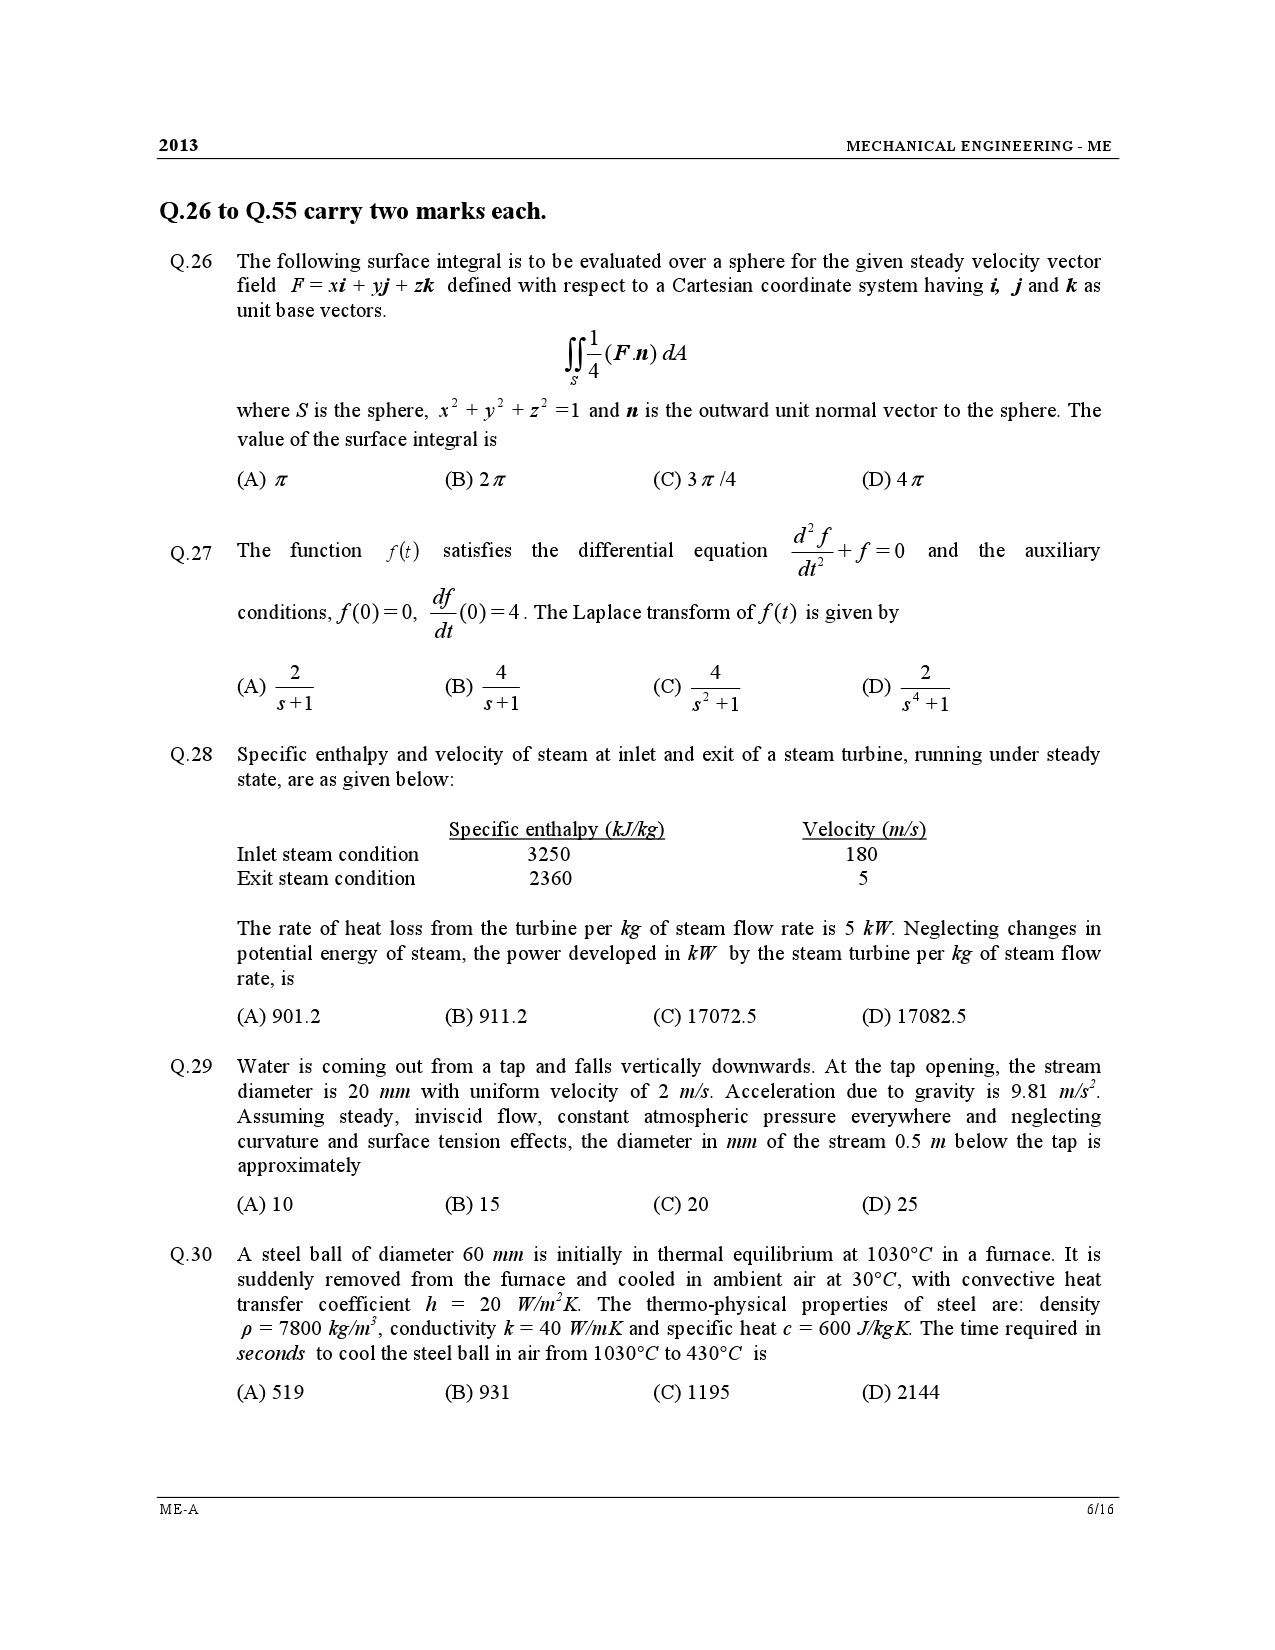 GATE Exam Question Paper 2013 Mechanical Engineering 6